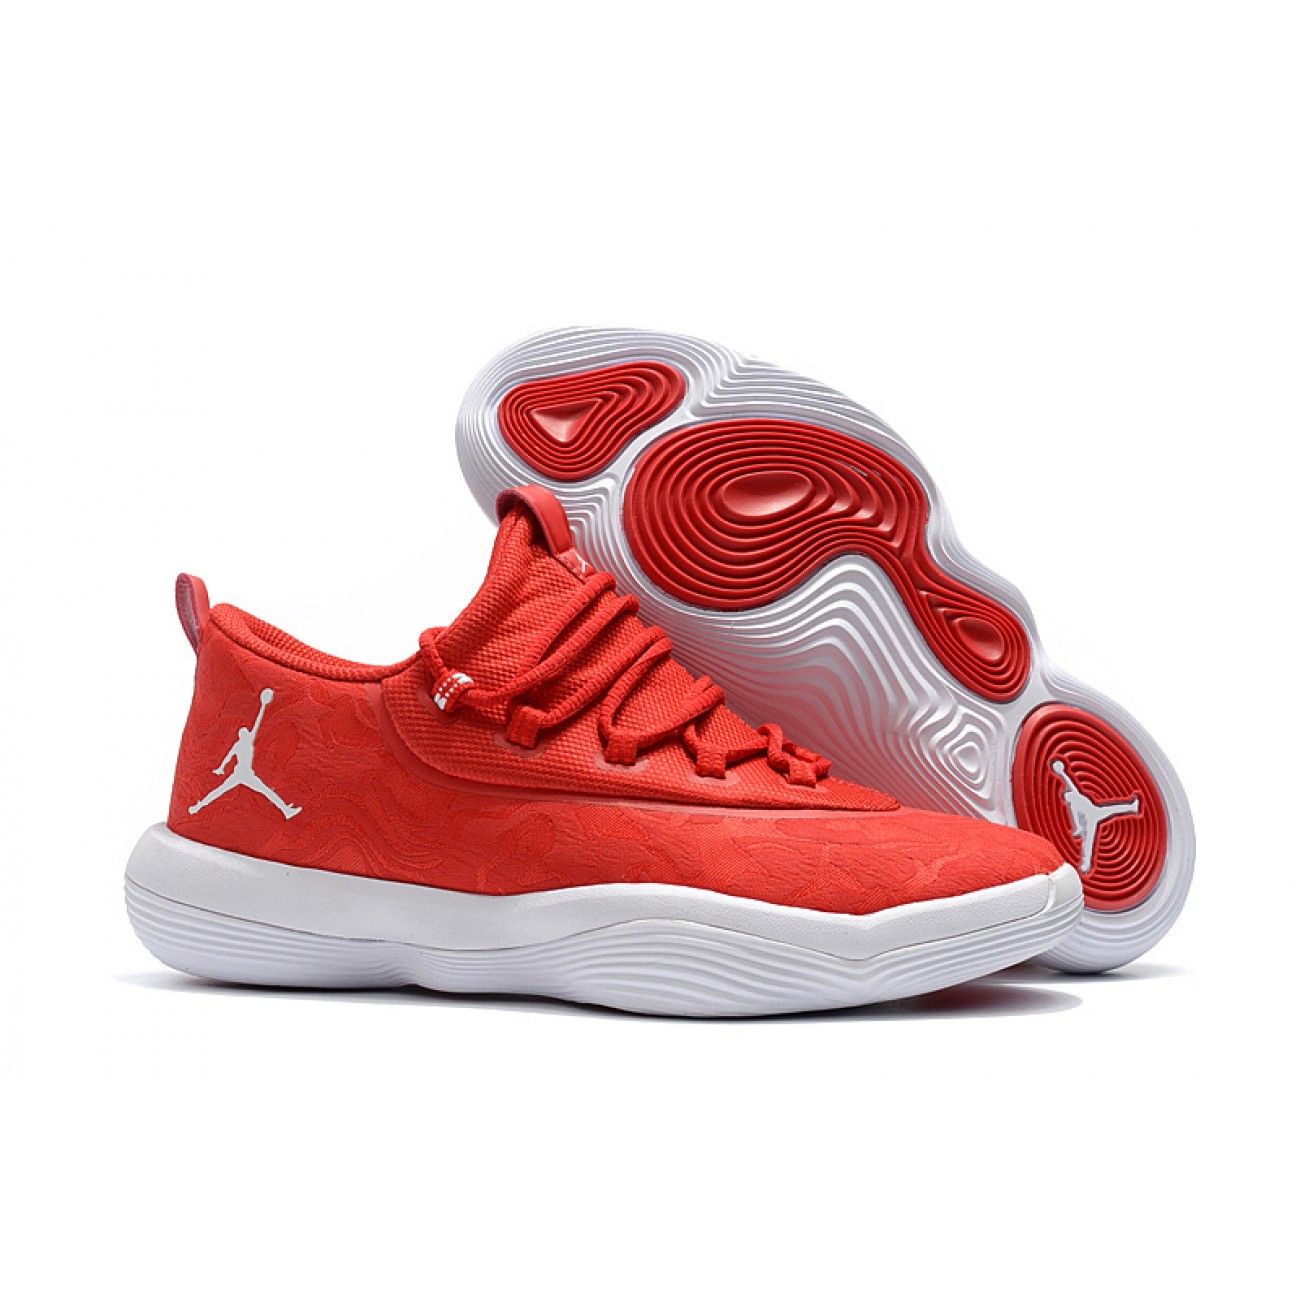 Air Jordan Super Fly Low Basketball Shoes Red/White